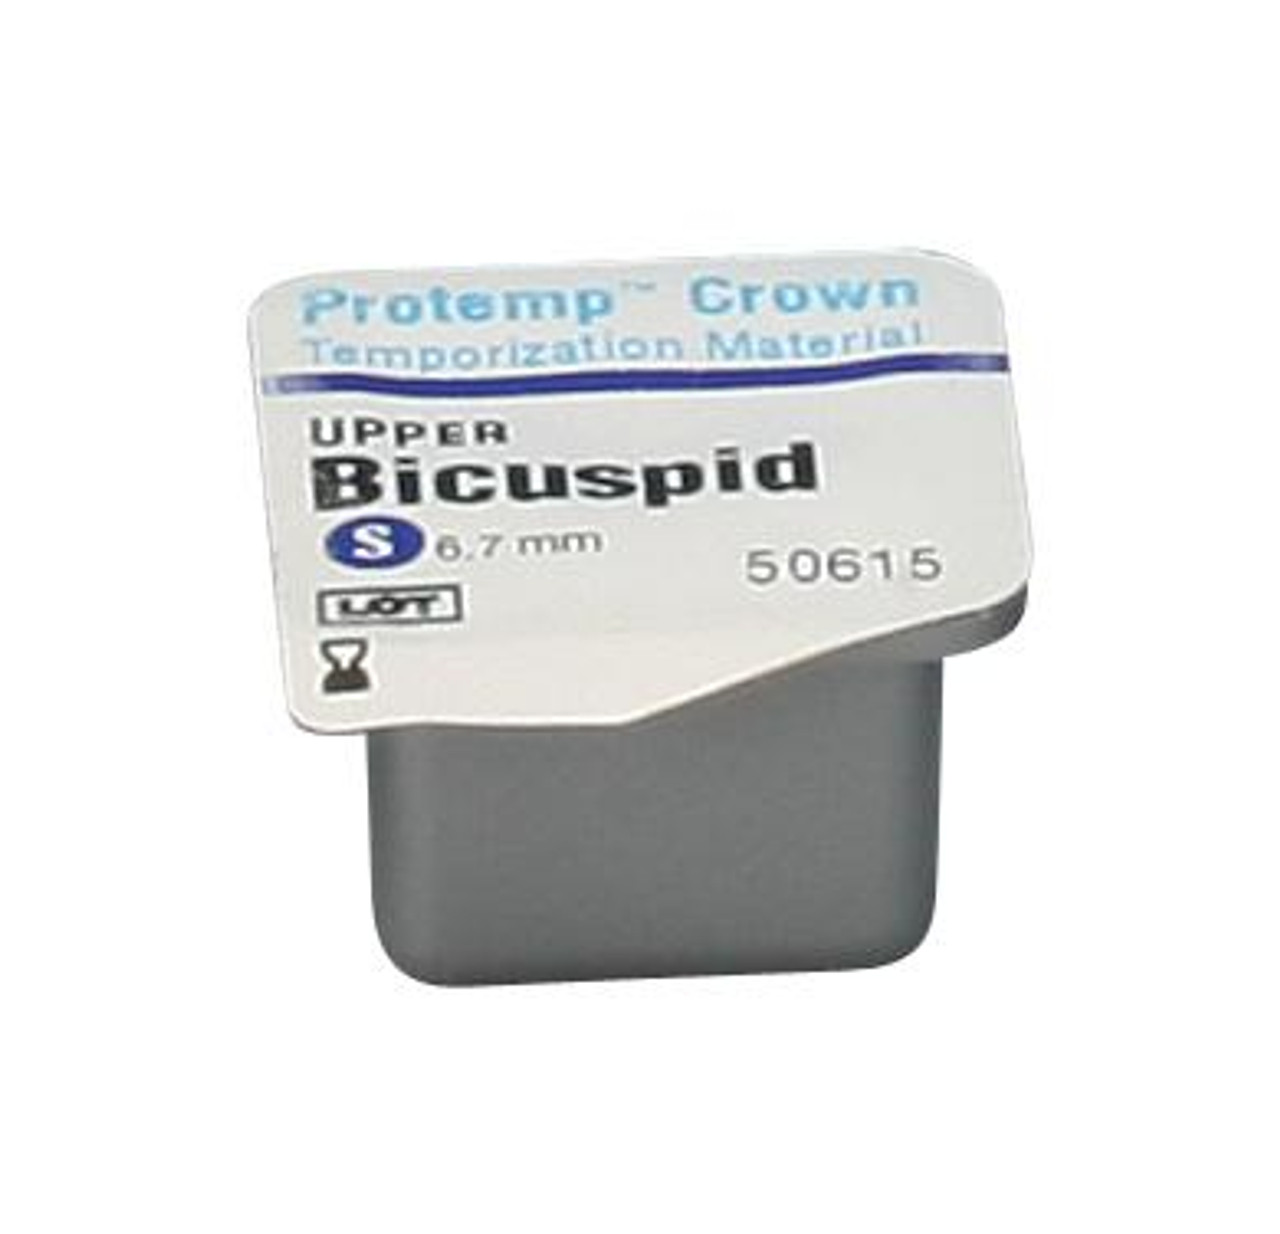 3M Protemp Crown Temporization Material, 50615, Bicuspid Upper, Small, 5 Crowns